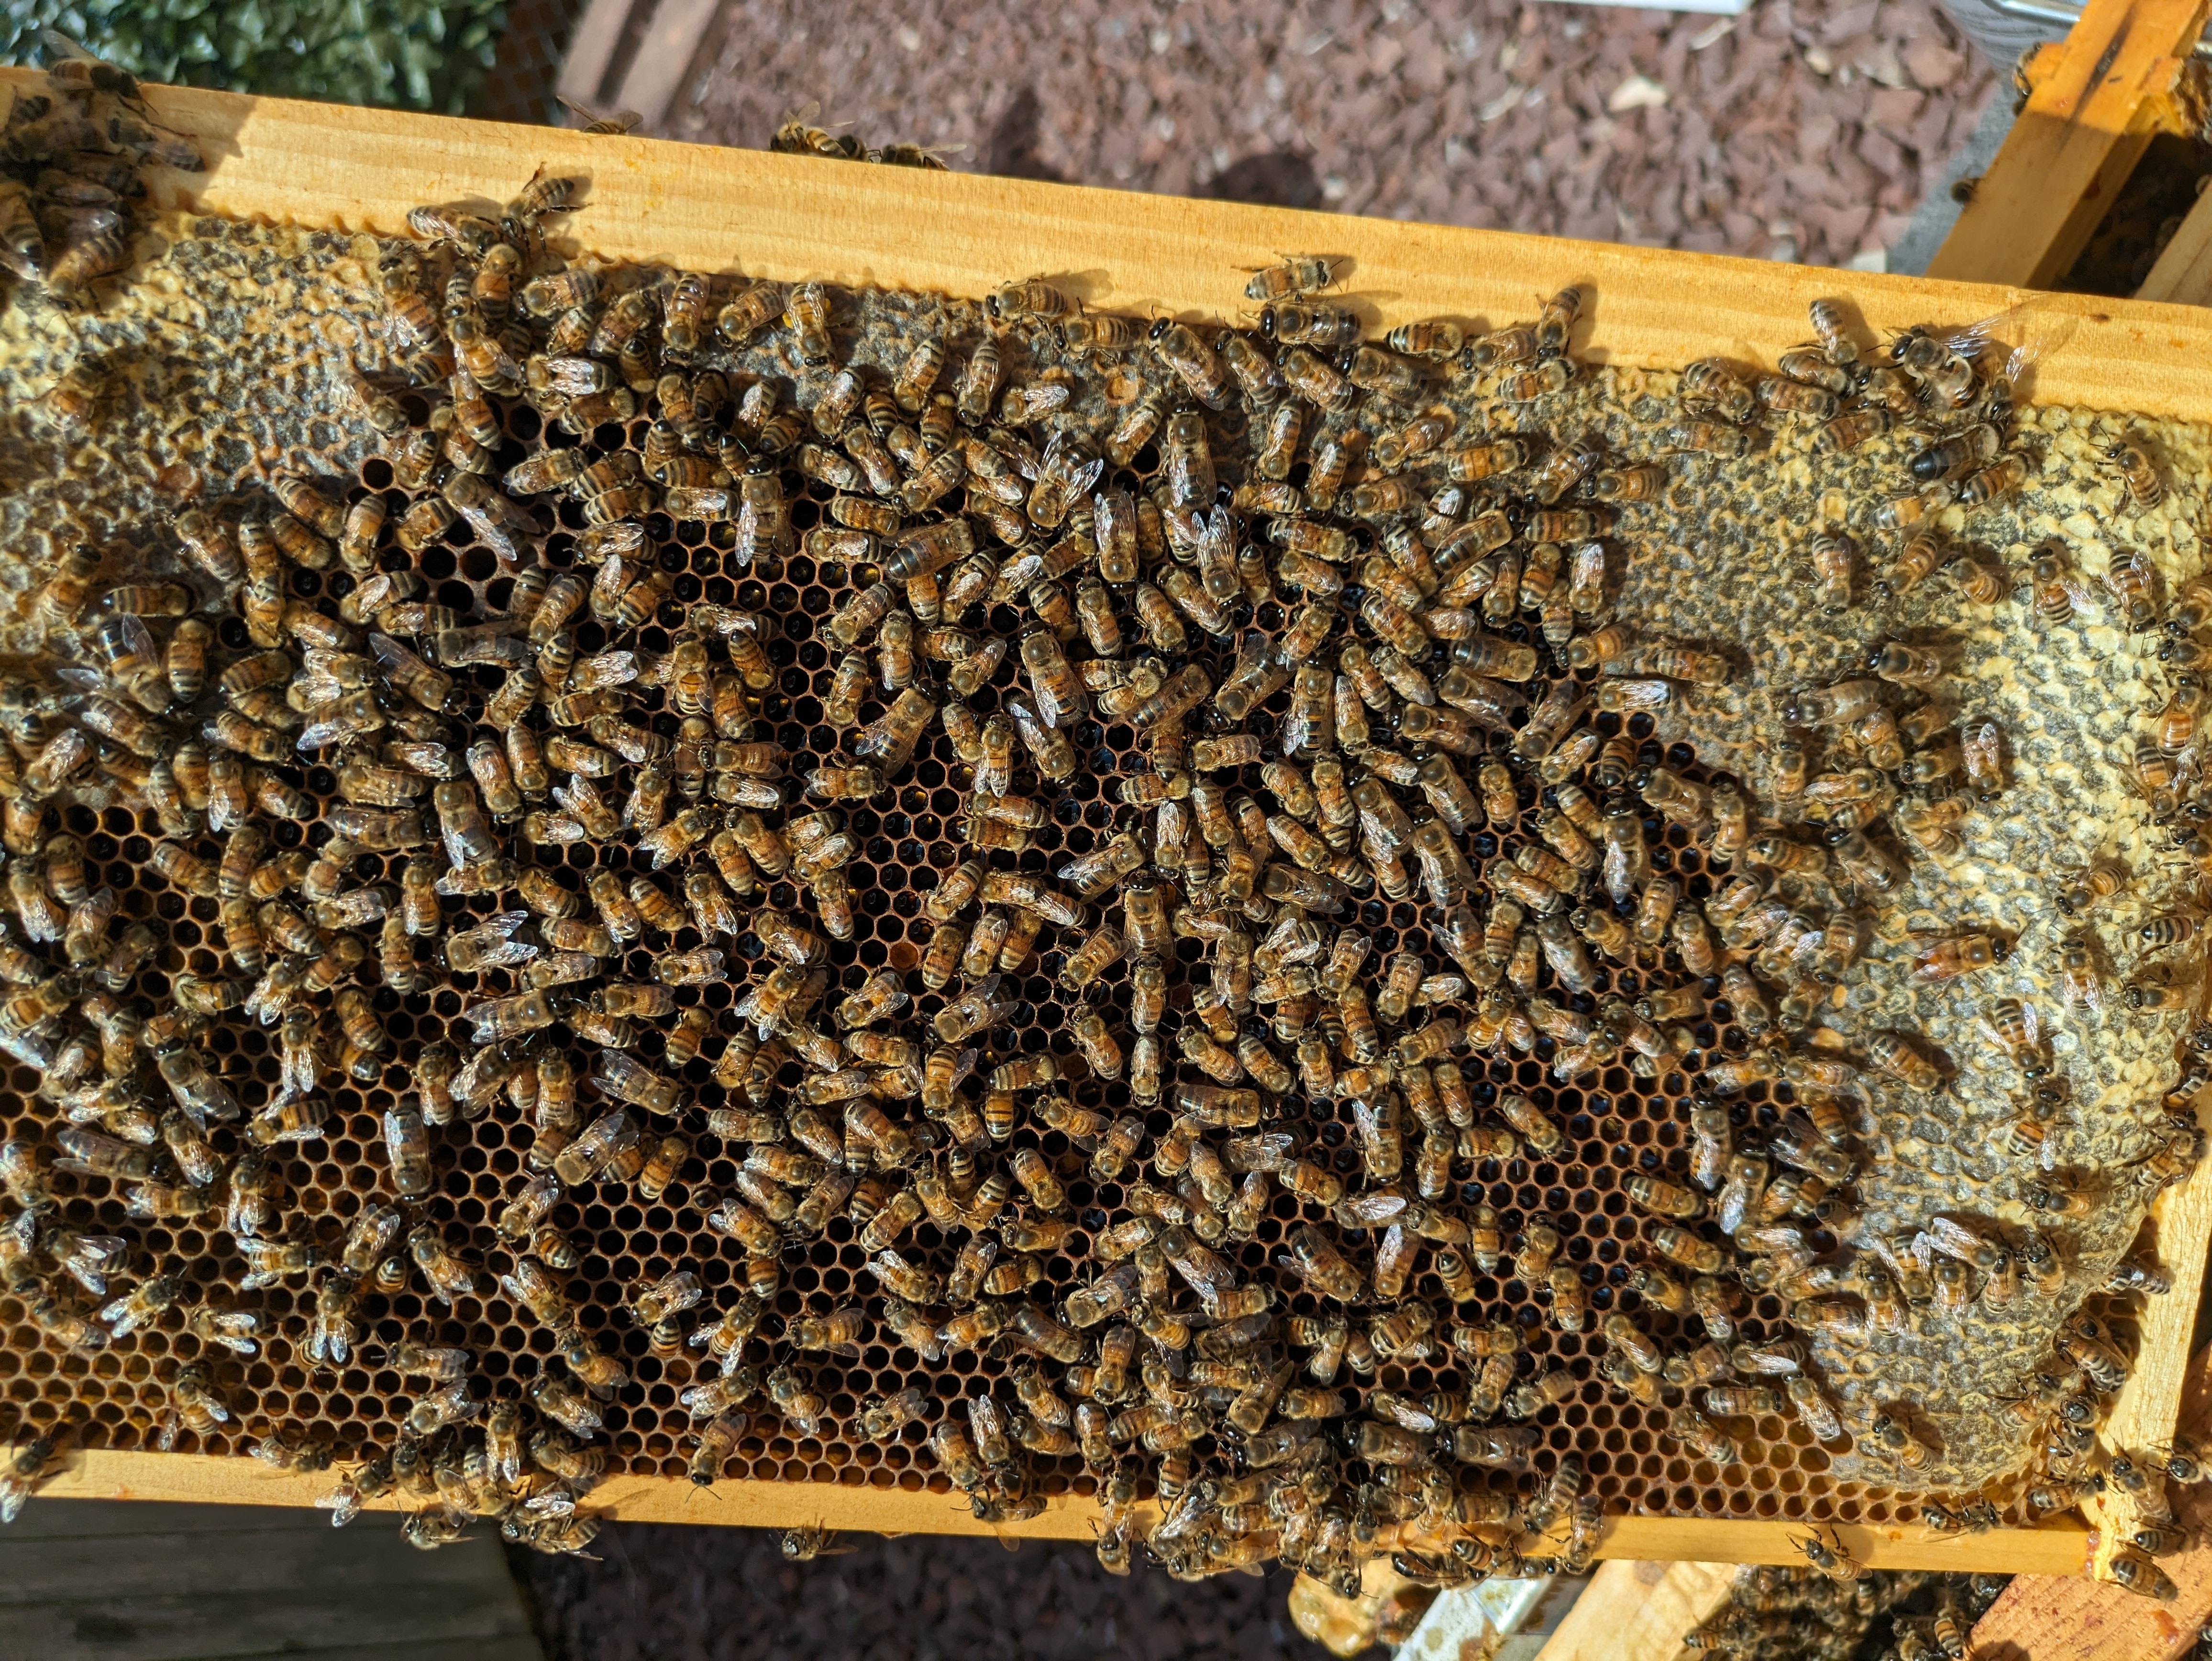 honeybee hive frame with stores of honey and pollen at the edges of the frame.